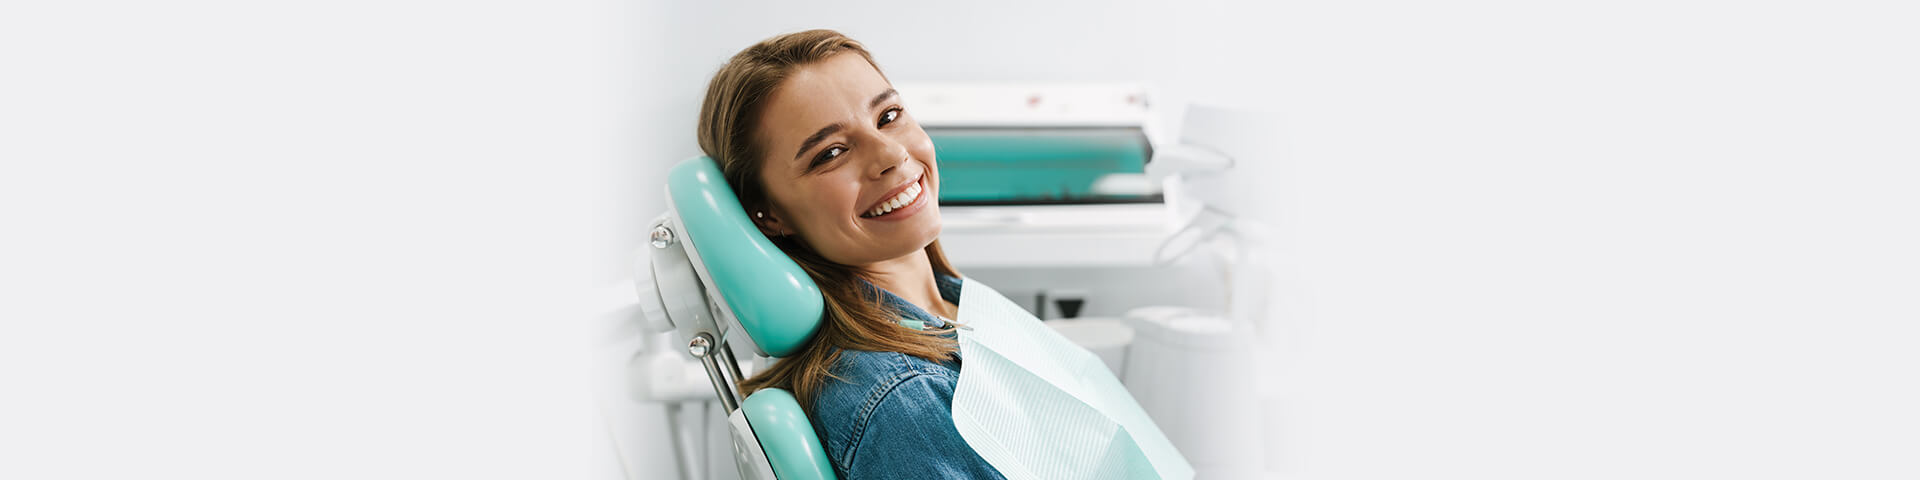 Thinking of Getting Tooth Fillings? Here’s What You Need to Know